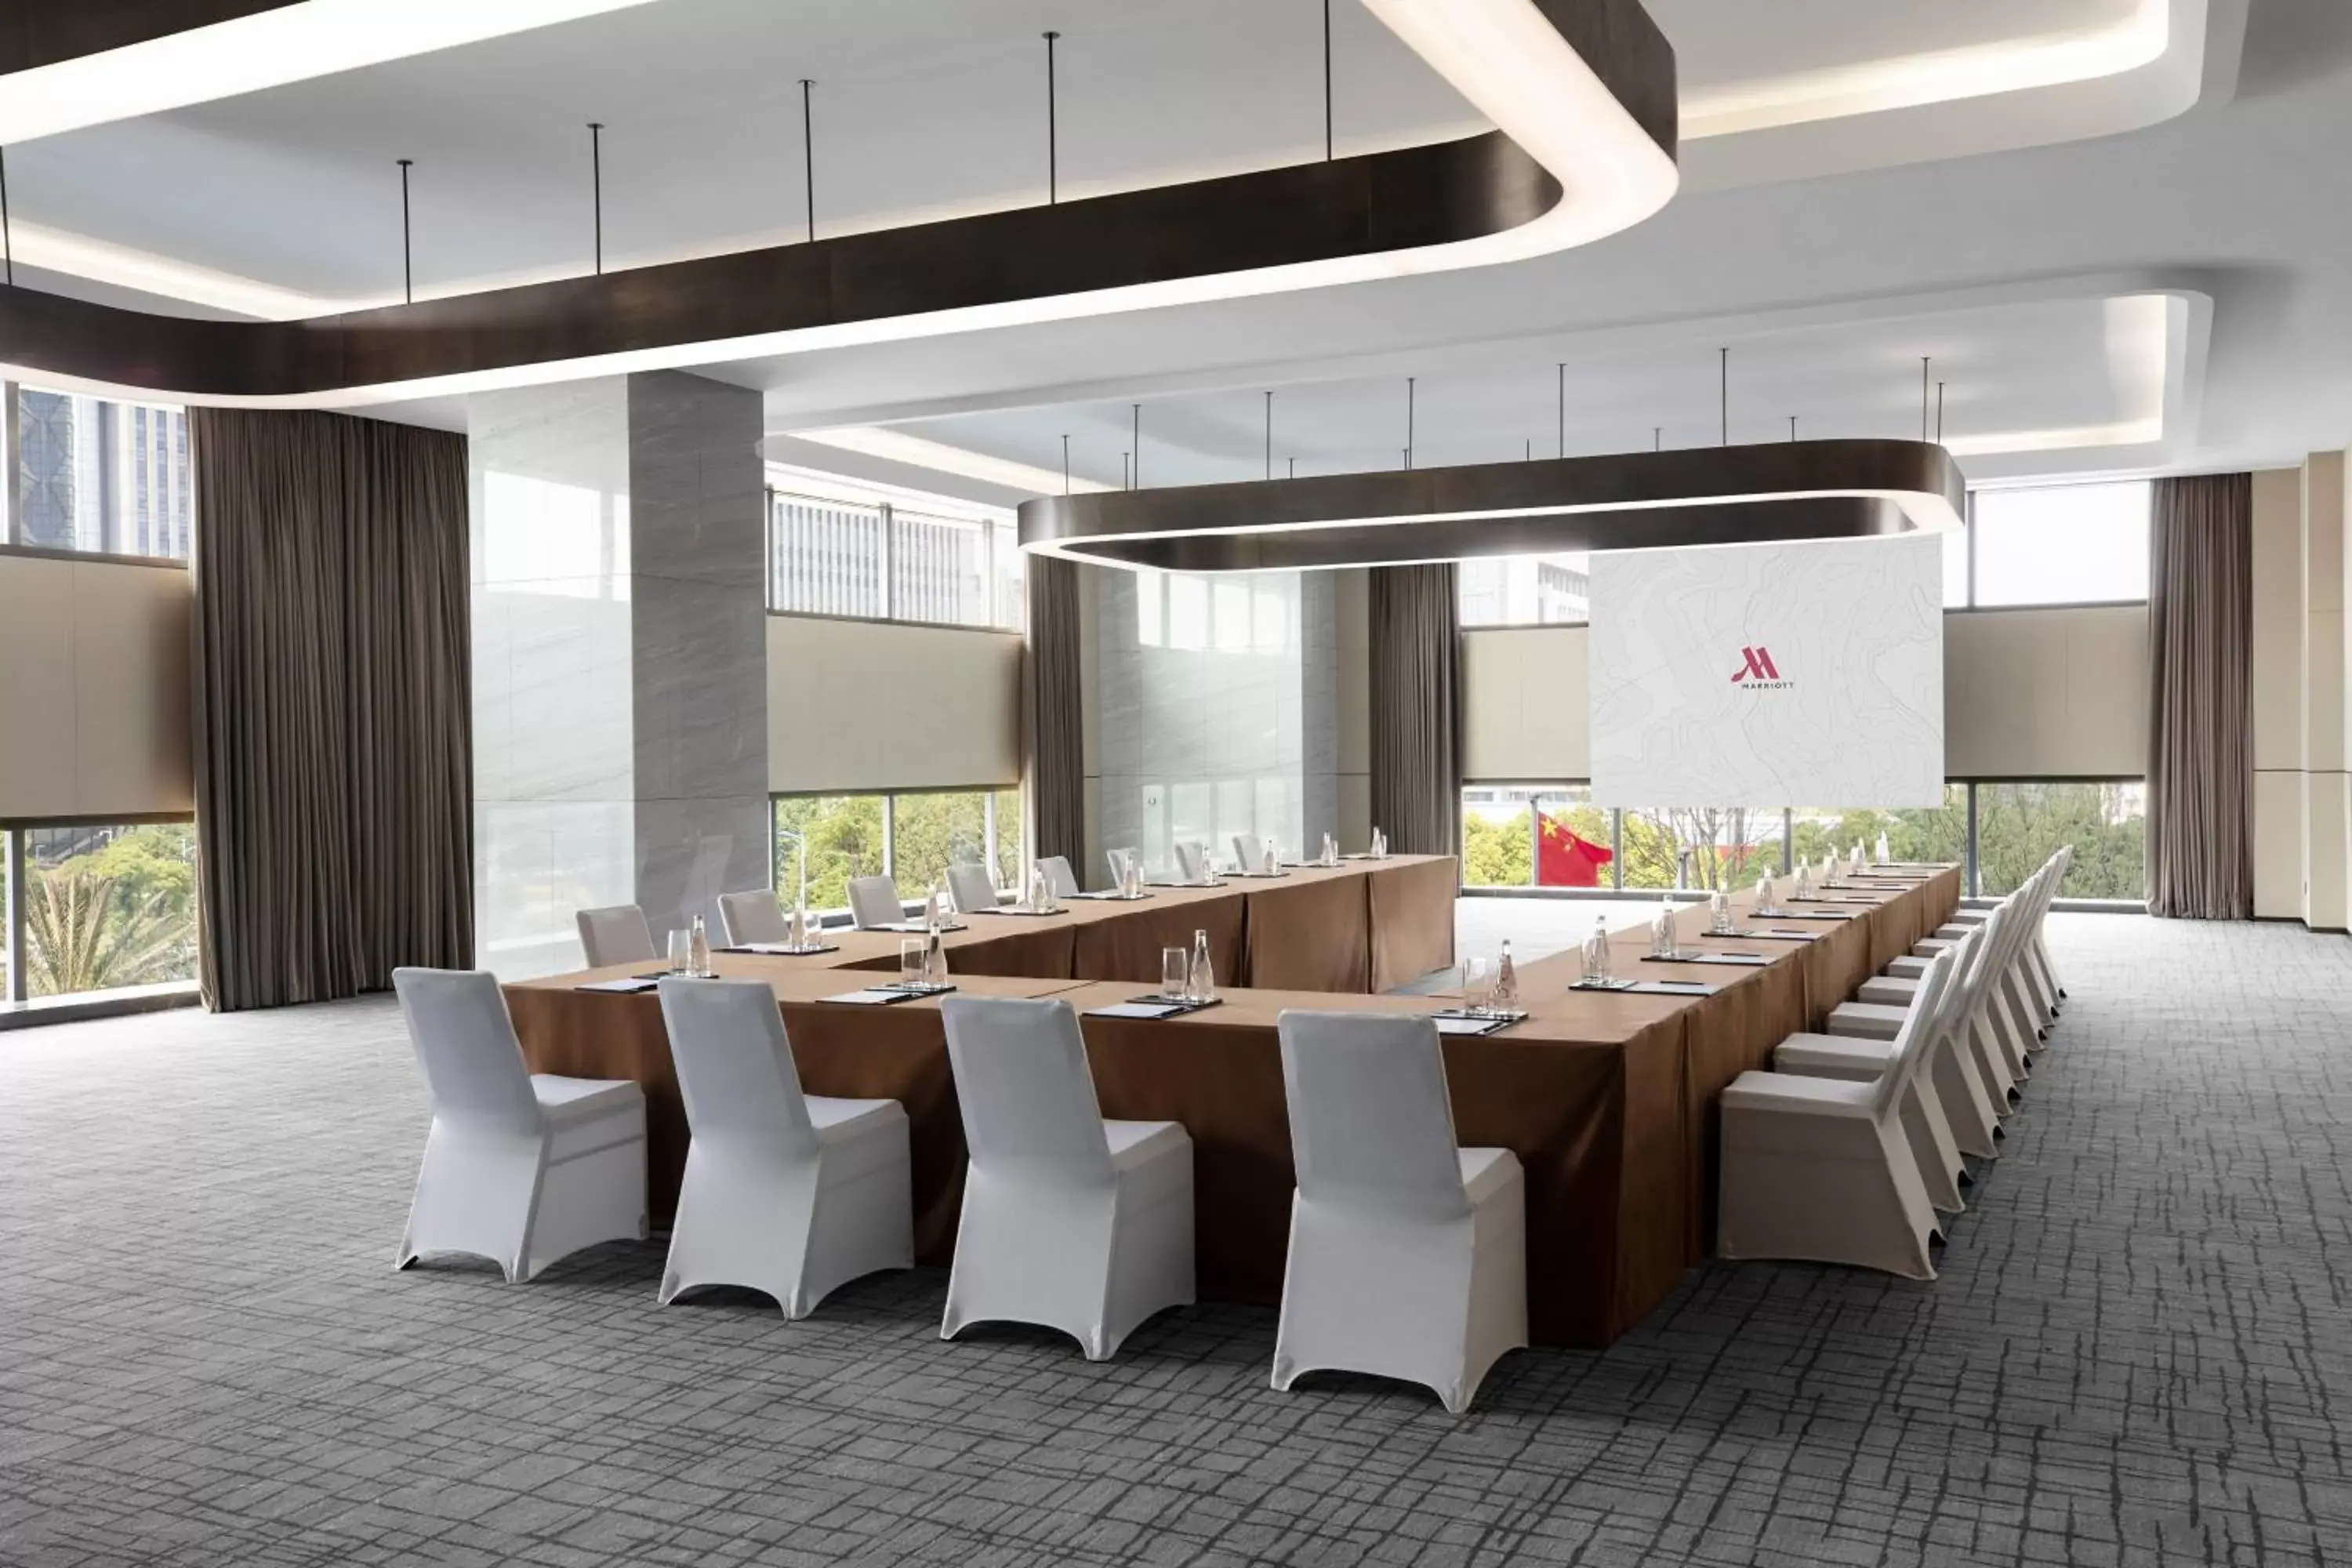 Meeting/conference room, Banquet Facilities in Zhangjiagang Marriott Hotel